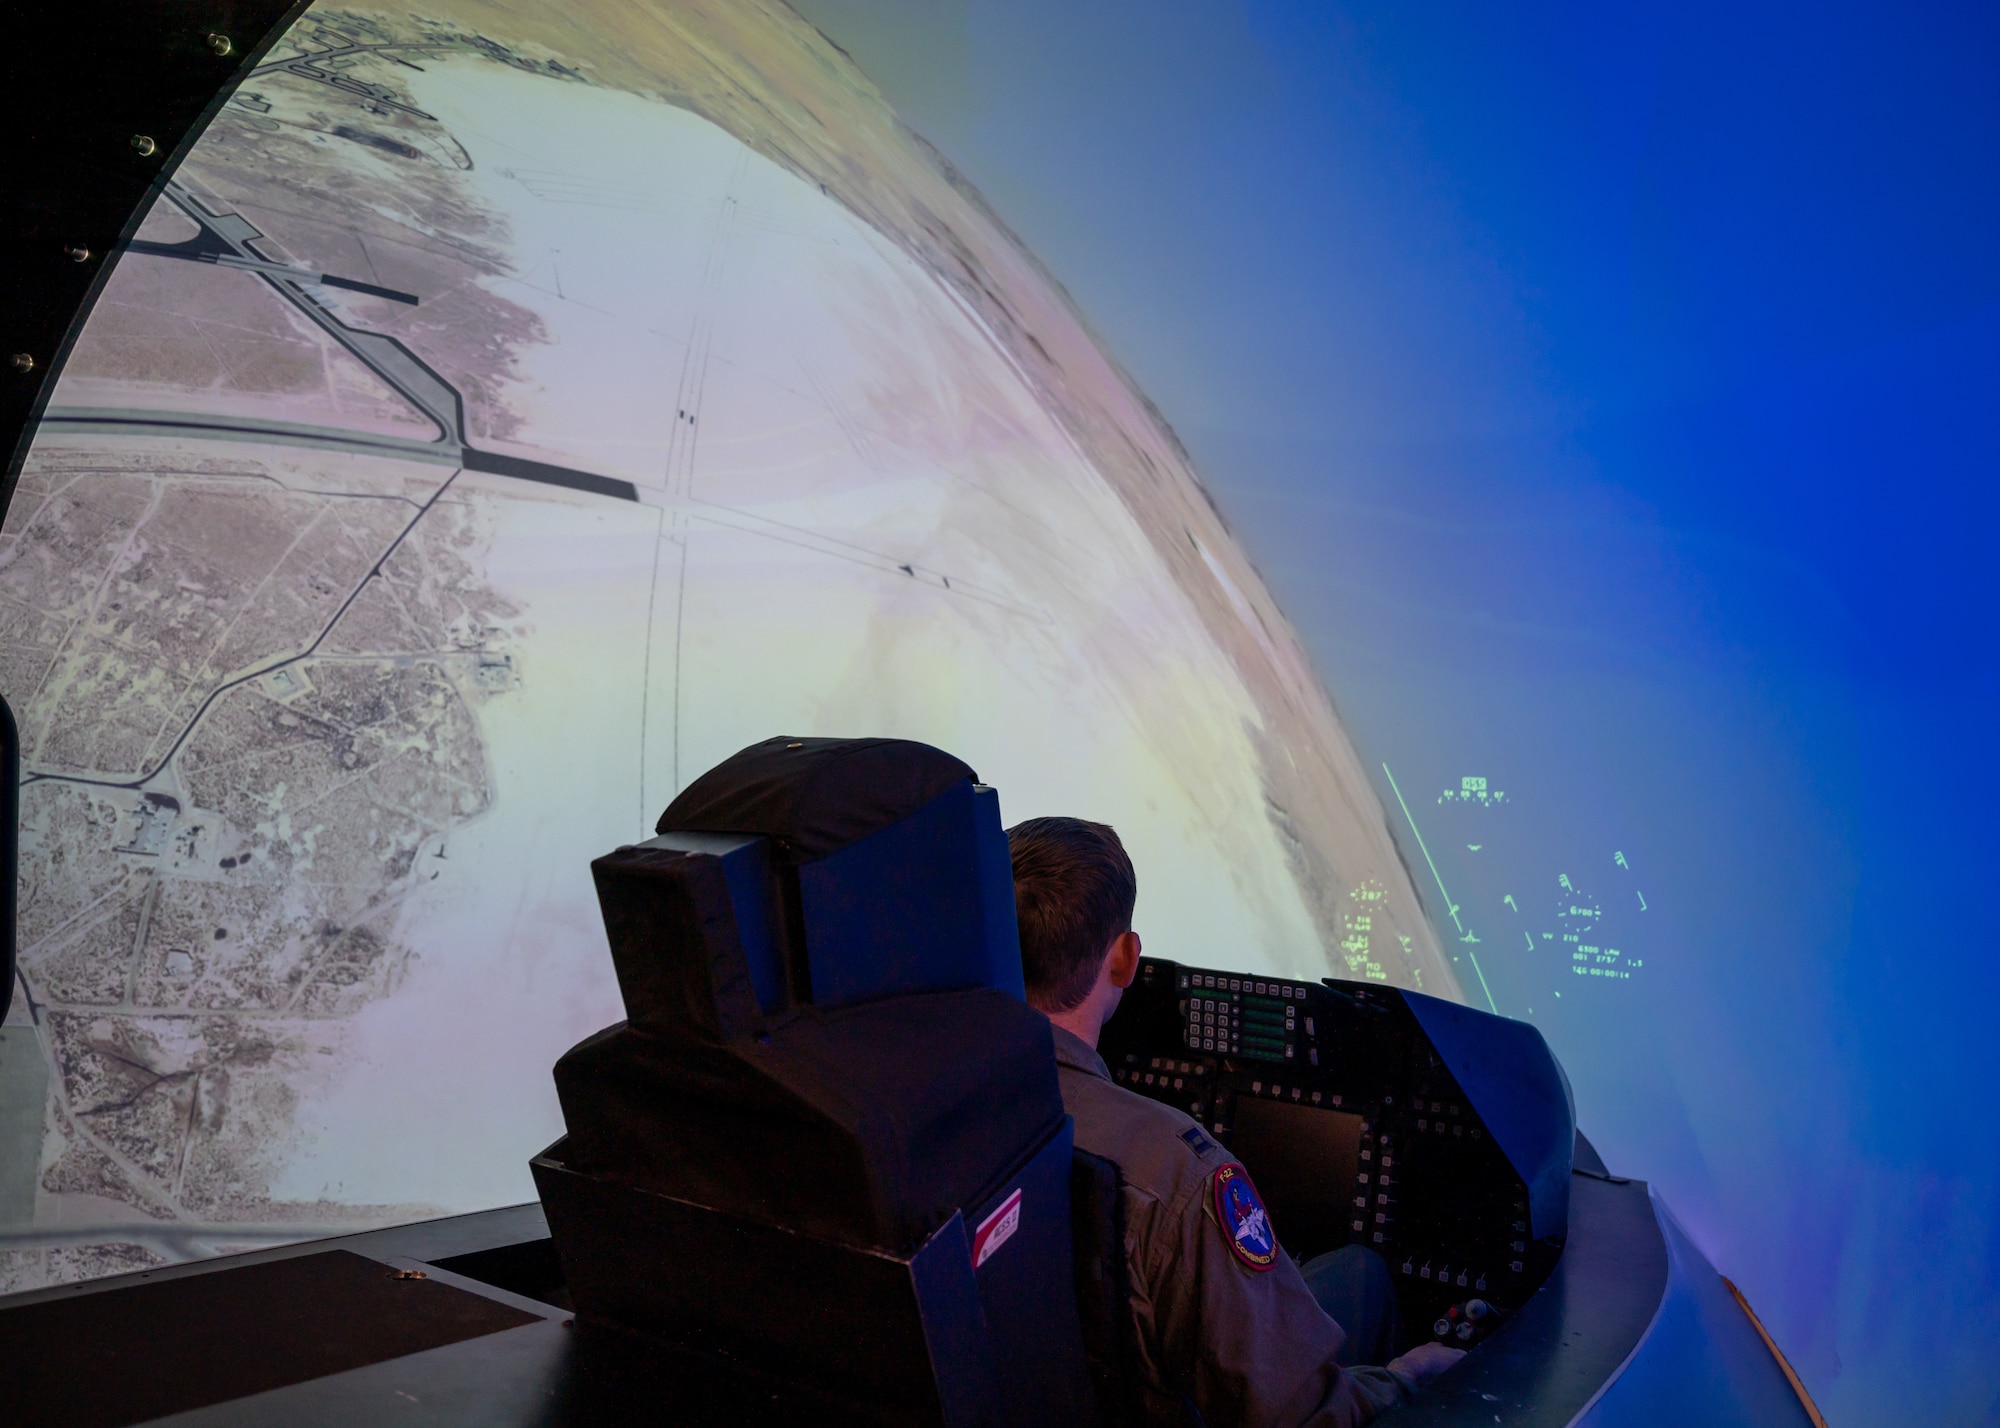 411th Flight Test Squadron personnel had the opportunity to fly in the squadron's F-22 Raptor simulators during Air Dominance Day at Edwards Air Force Base, California, April 15. (Air Force photo by Giancarlo Casem)